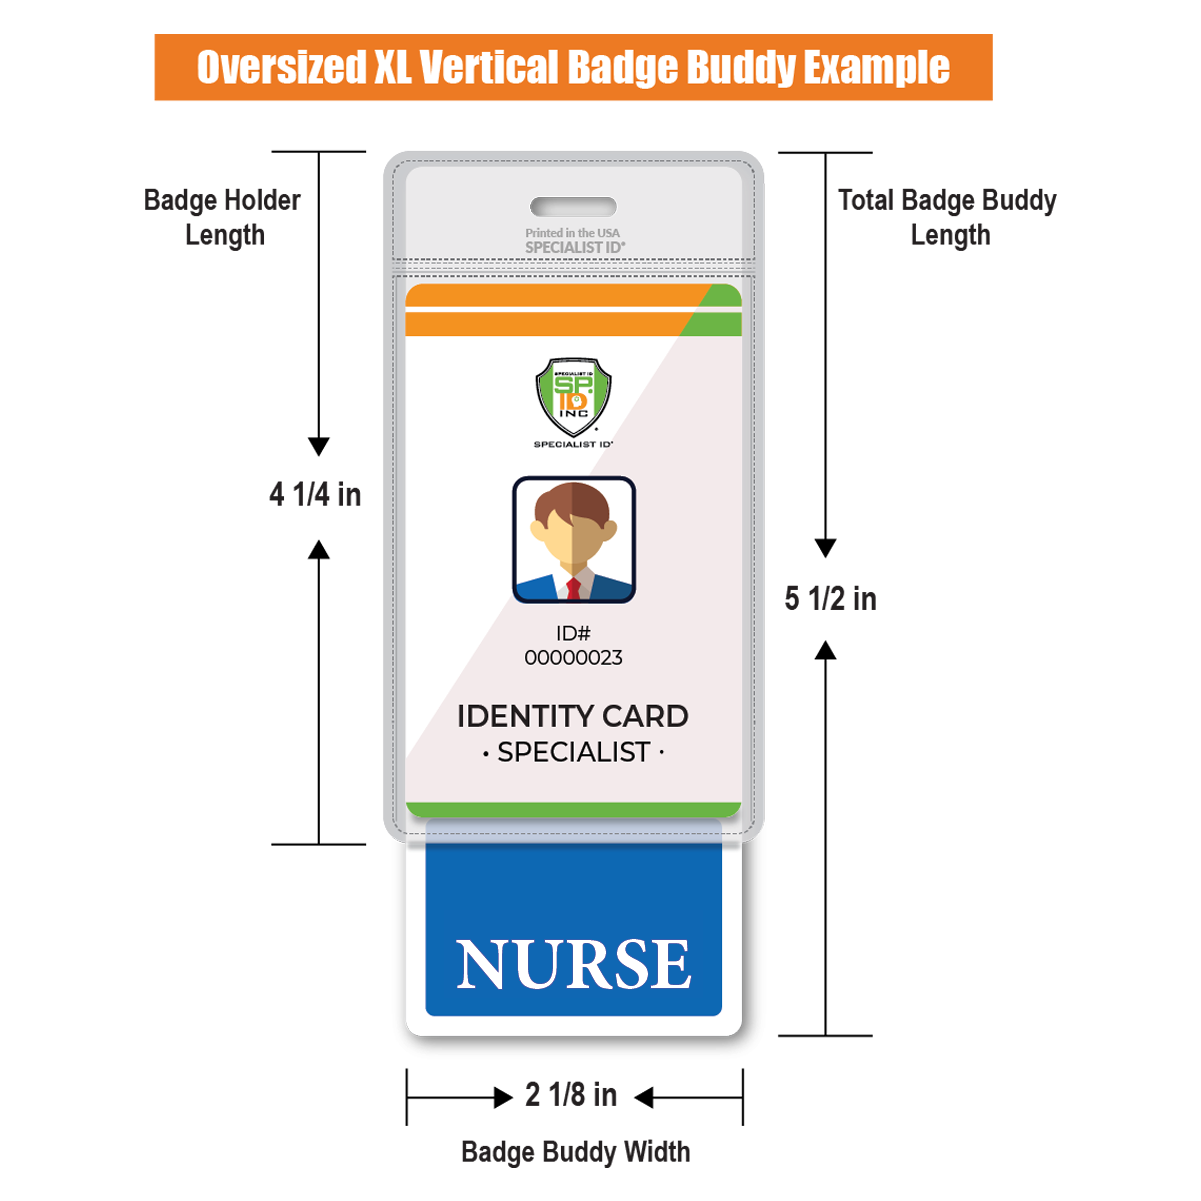 Oversized vertical nurse badge buddy dimensions are 5 1/2" in length by 2 1/8" wide